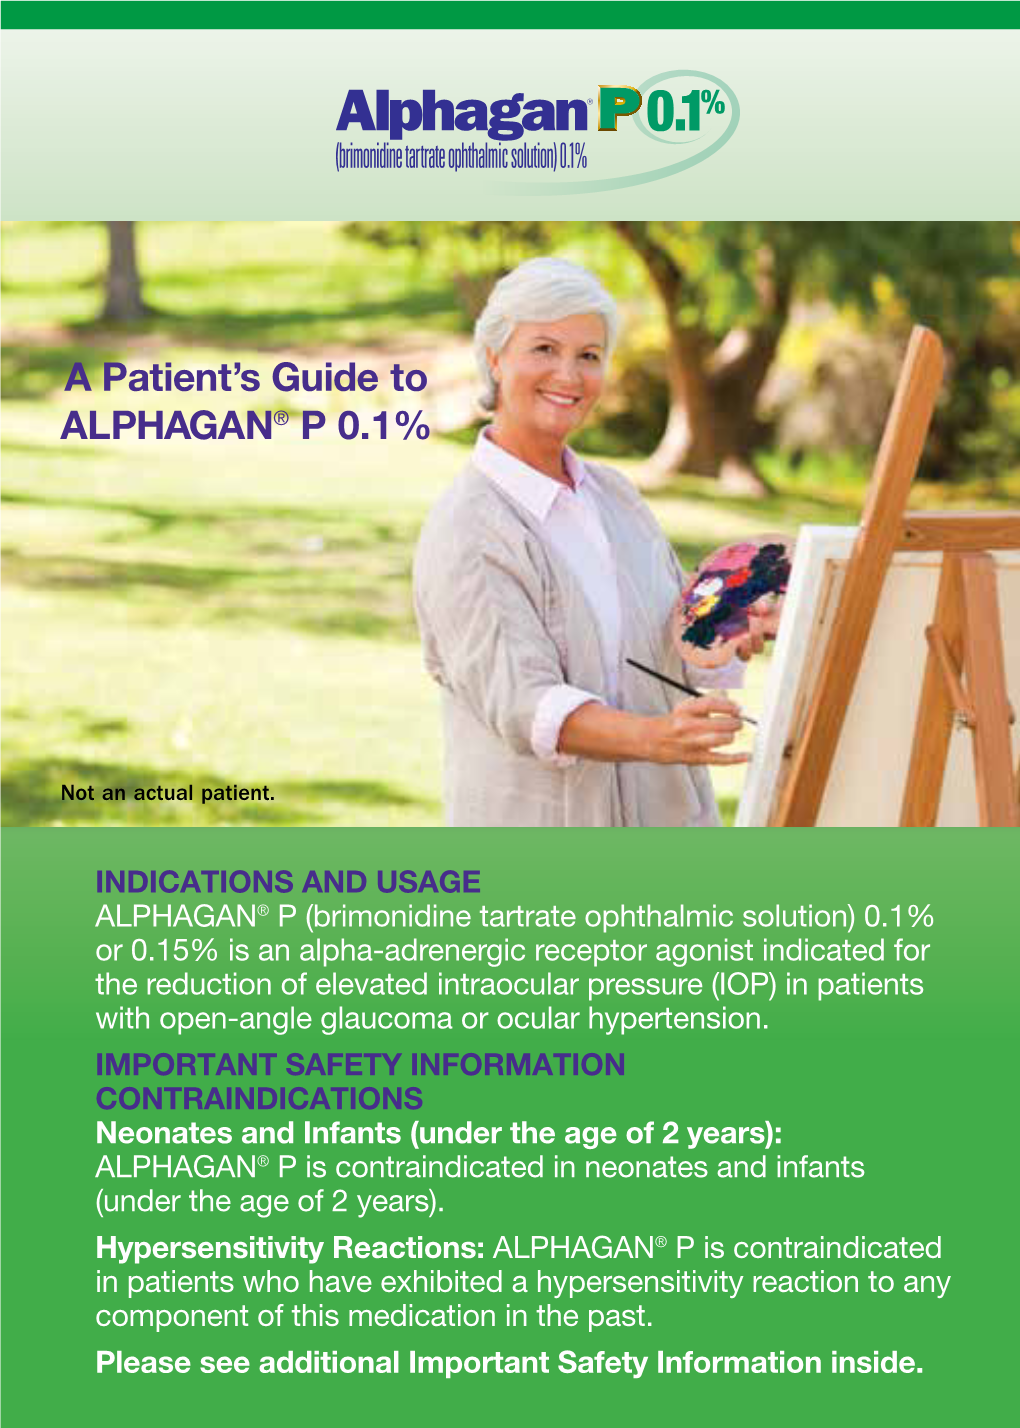 A Patient's Guide to Alphagan® P 0.1%